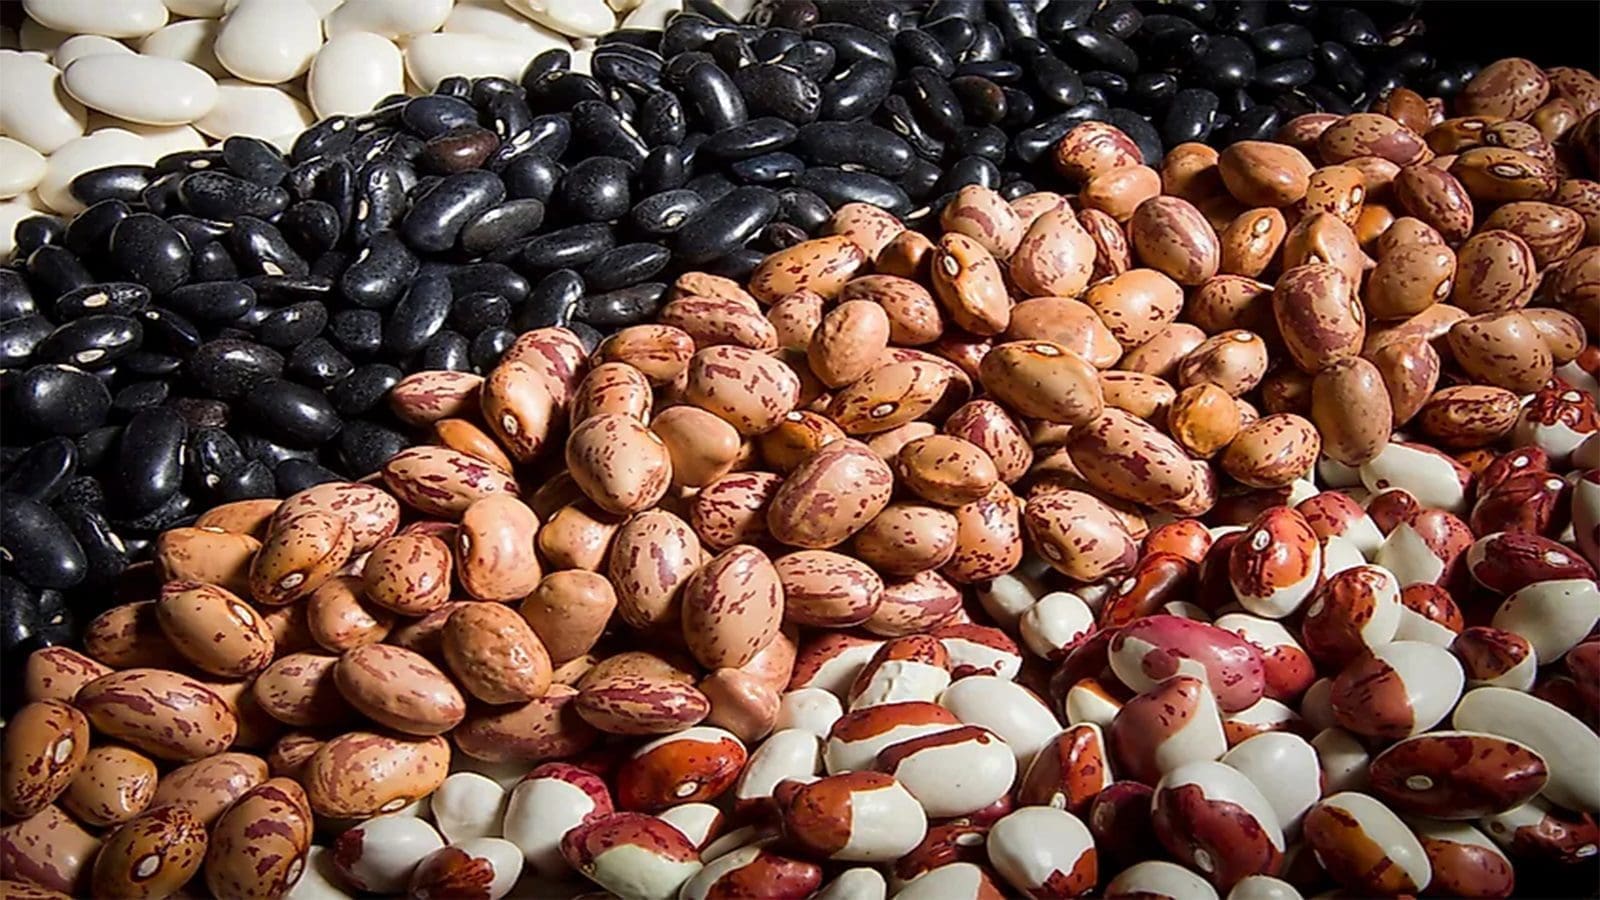 Kenyan farmers encouraged to cultivate highly productive biofortified beans